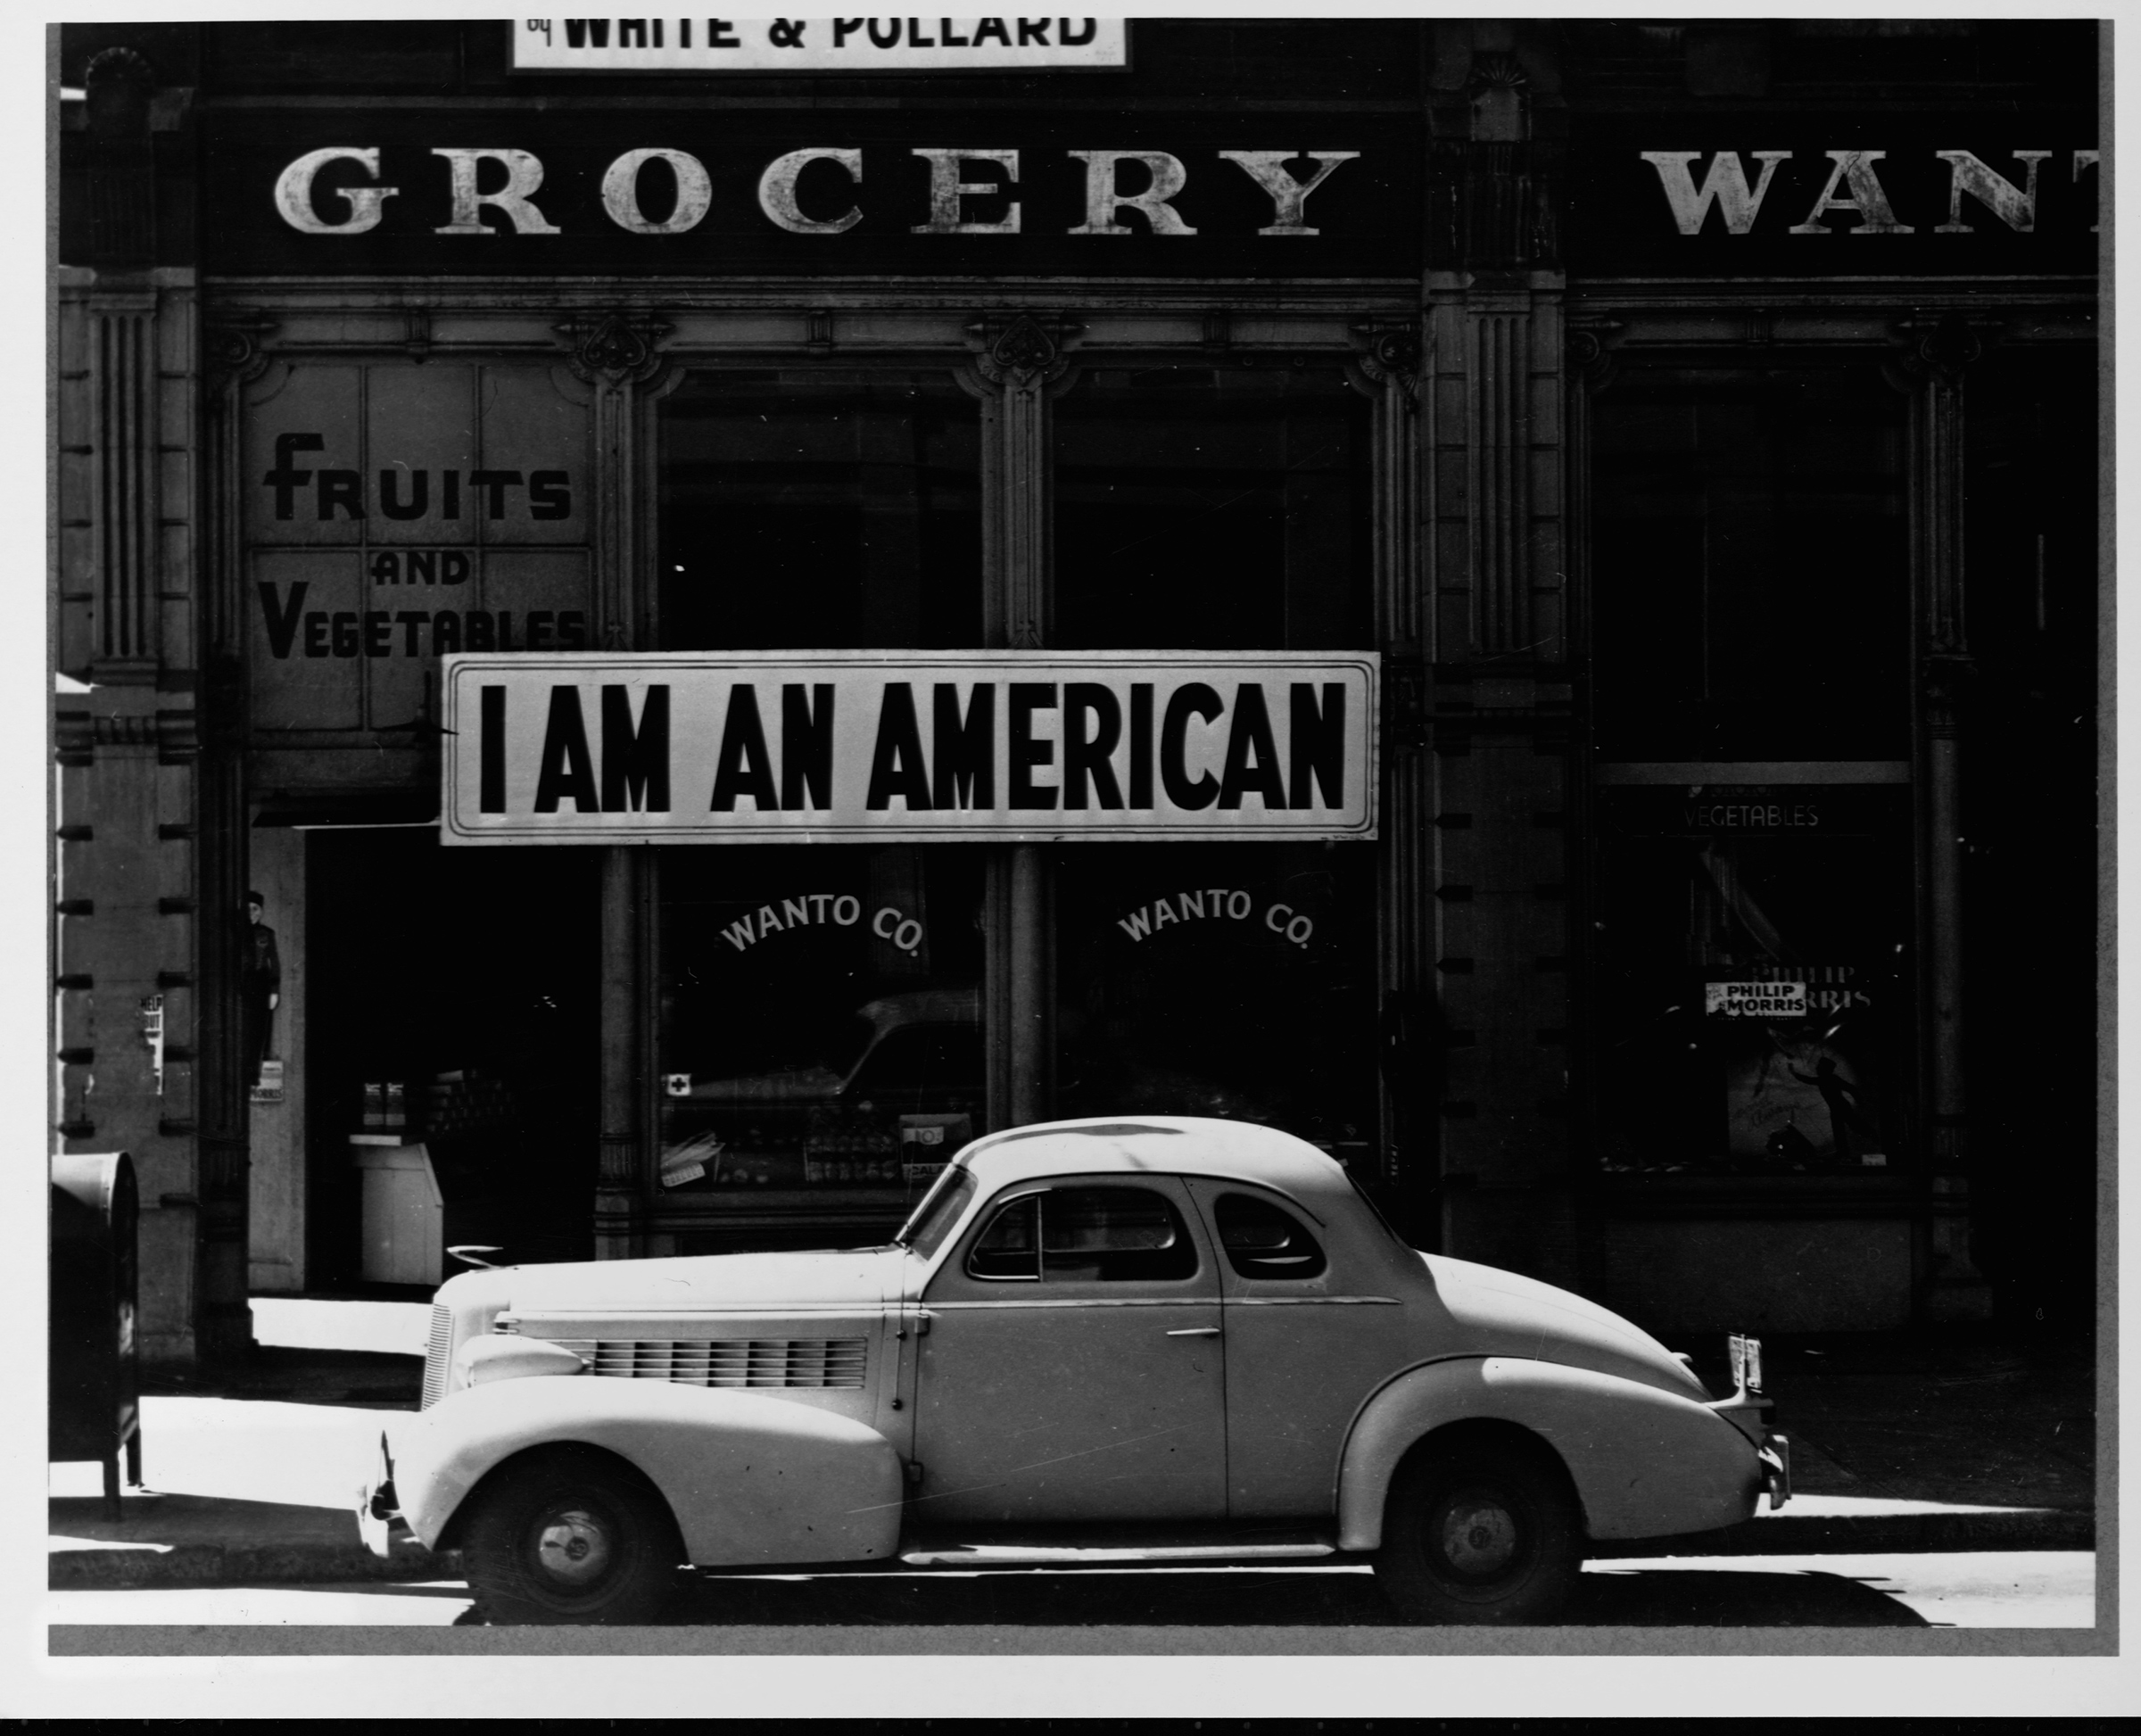 The Japanese owner of this grocery store in Oakland, California displays a sign reminding pedestrians of his loyalties to America, and not Japan, in 1944.